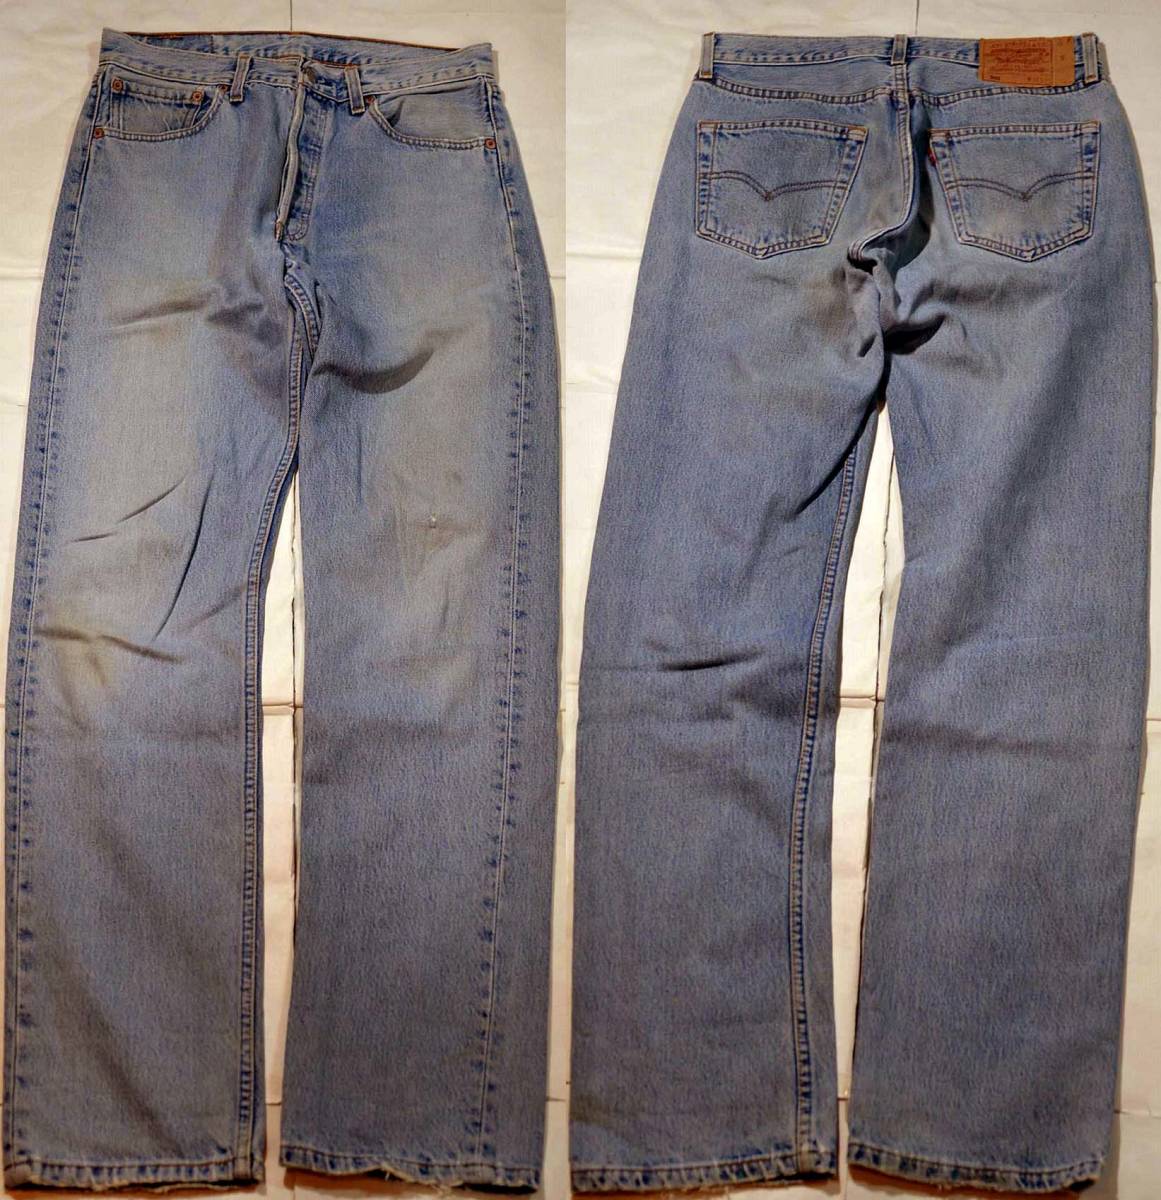 t71/LEVIS501アメリカ製 MADE IN U.S.A. 色落ち抜群 程度良好！